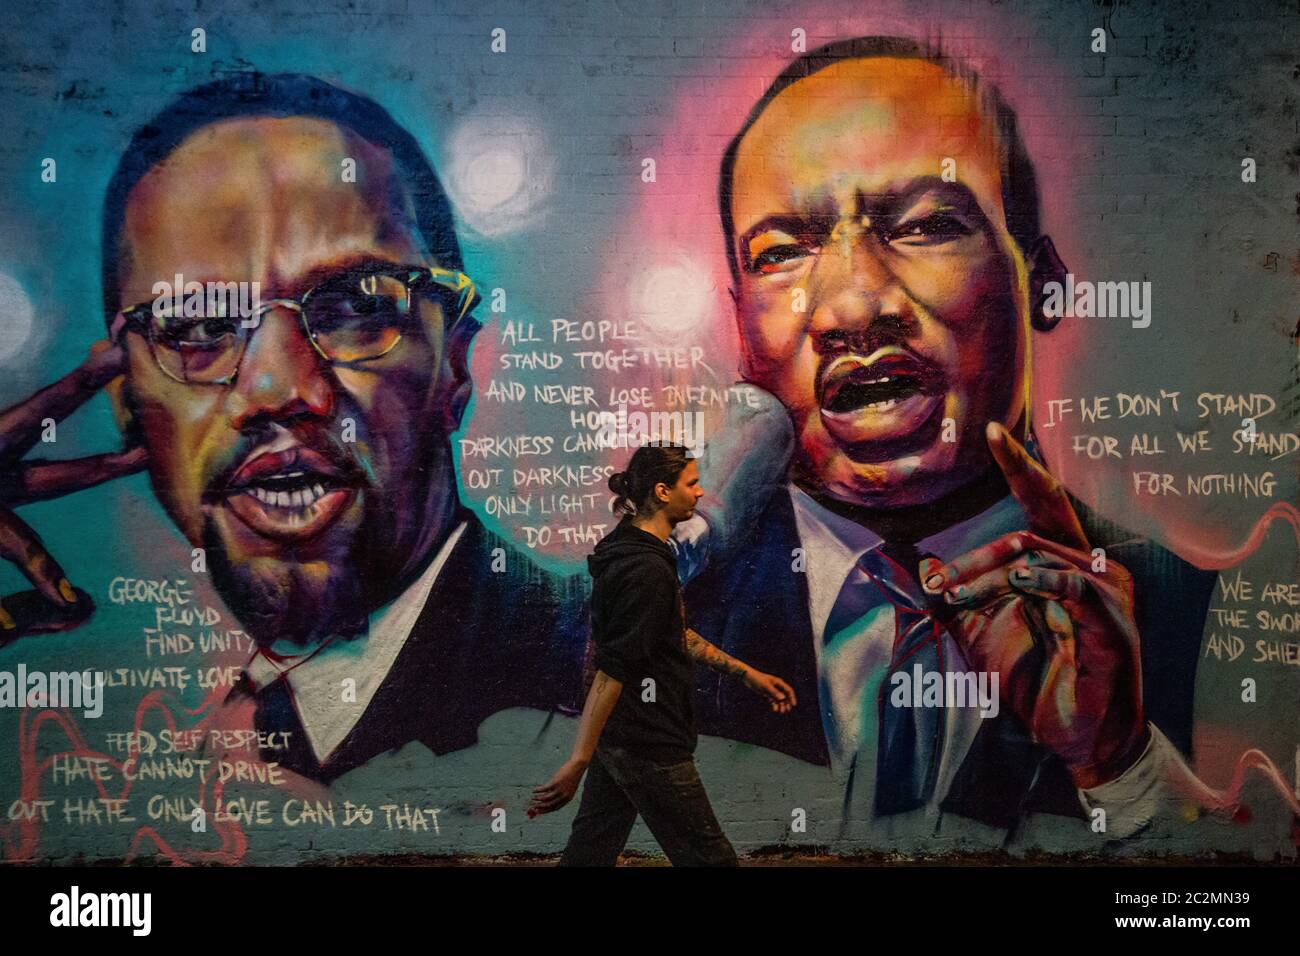 London, UK. 17th June, 2020. A man walks past a mural of Malcom X and  Martin Luther King paying tribute to George Floyd, a Black man who died in  police custody in